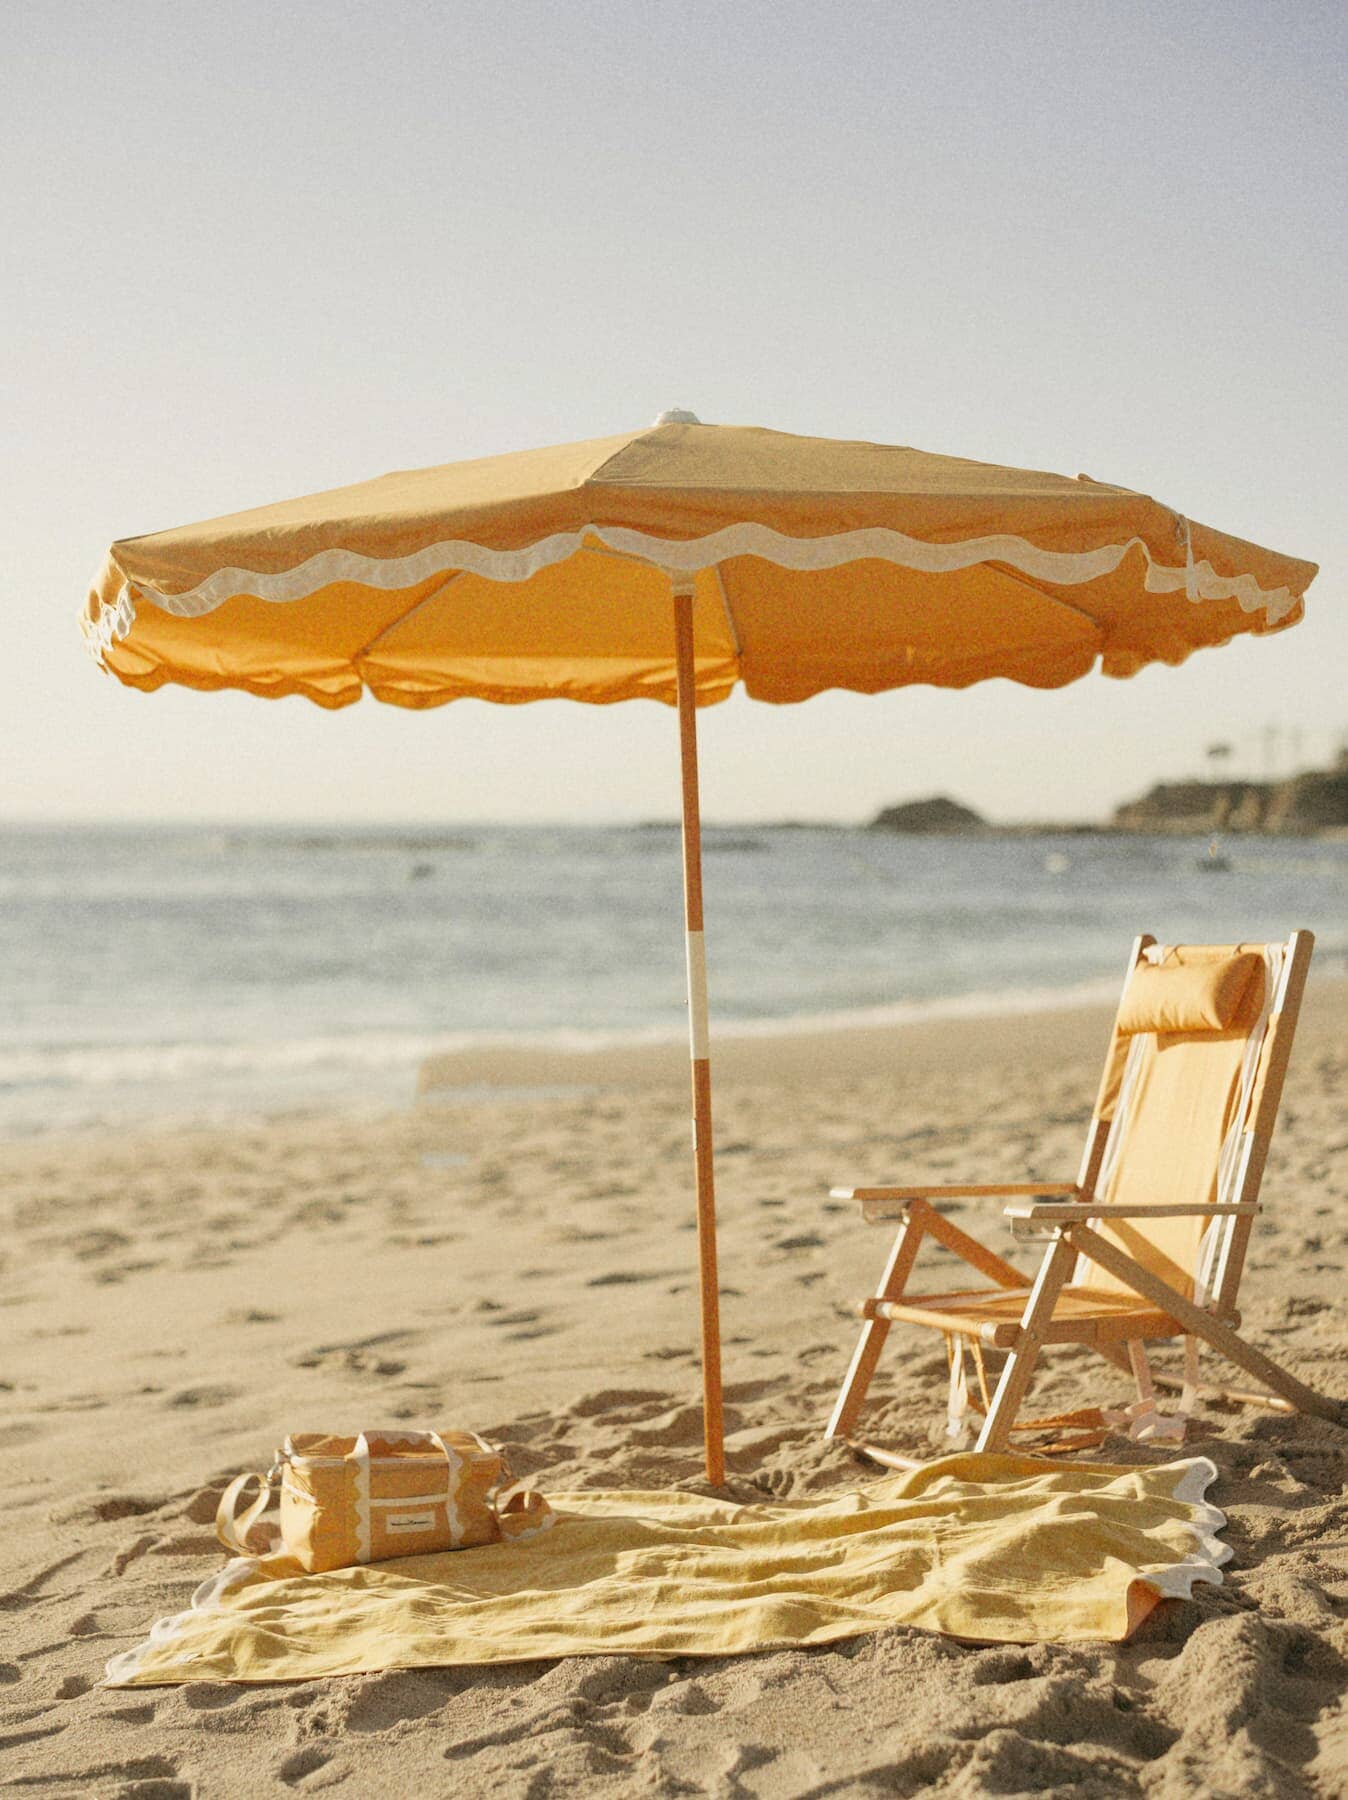 Riviera mimosa beach set up with umbrella, chair, blanket and cooler